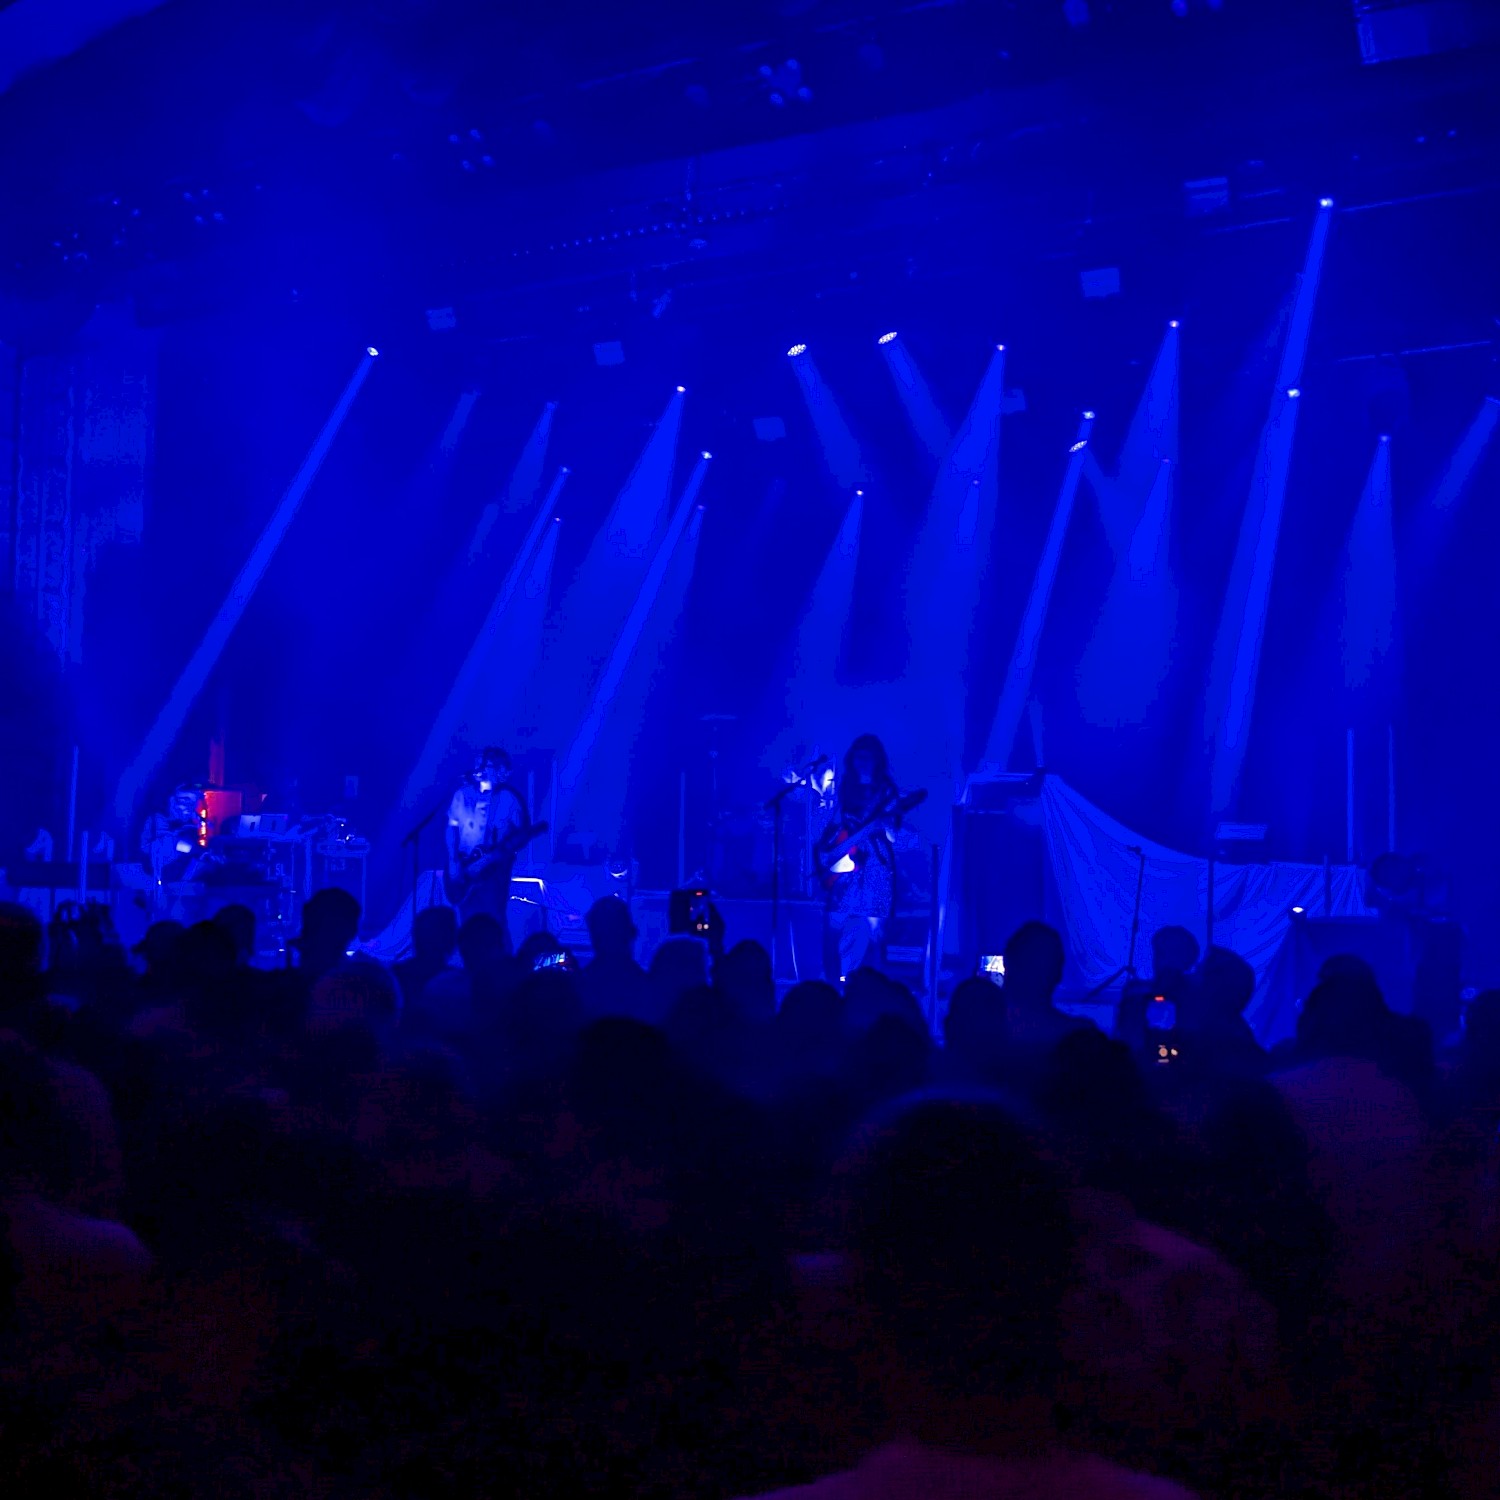 Silversun Pickups on stage with blue lighting